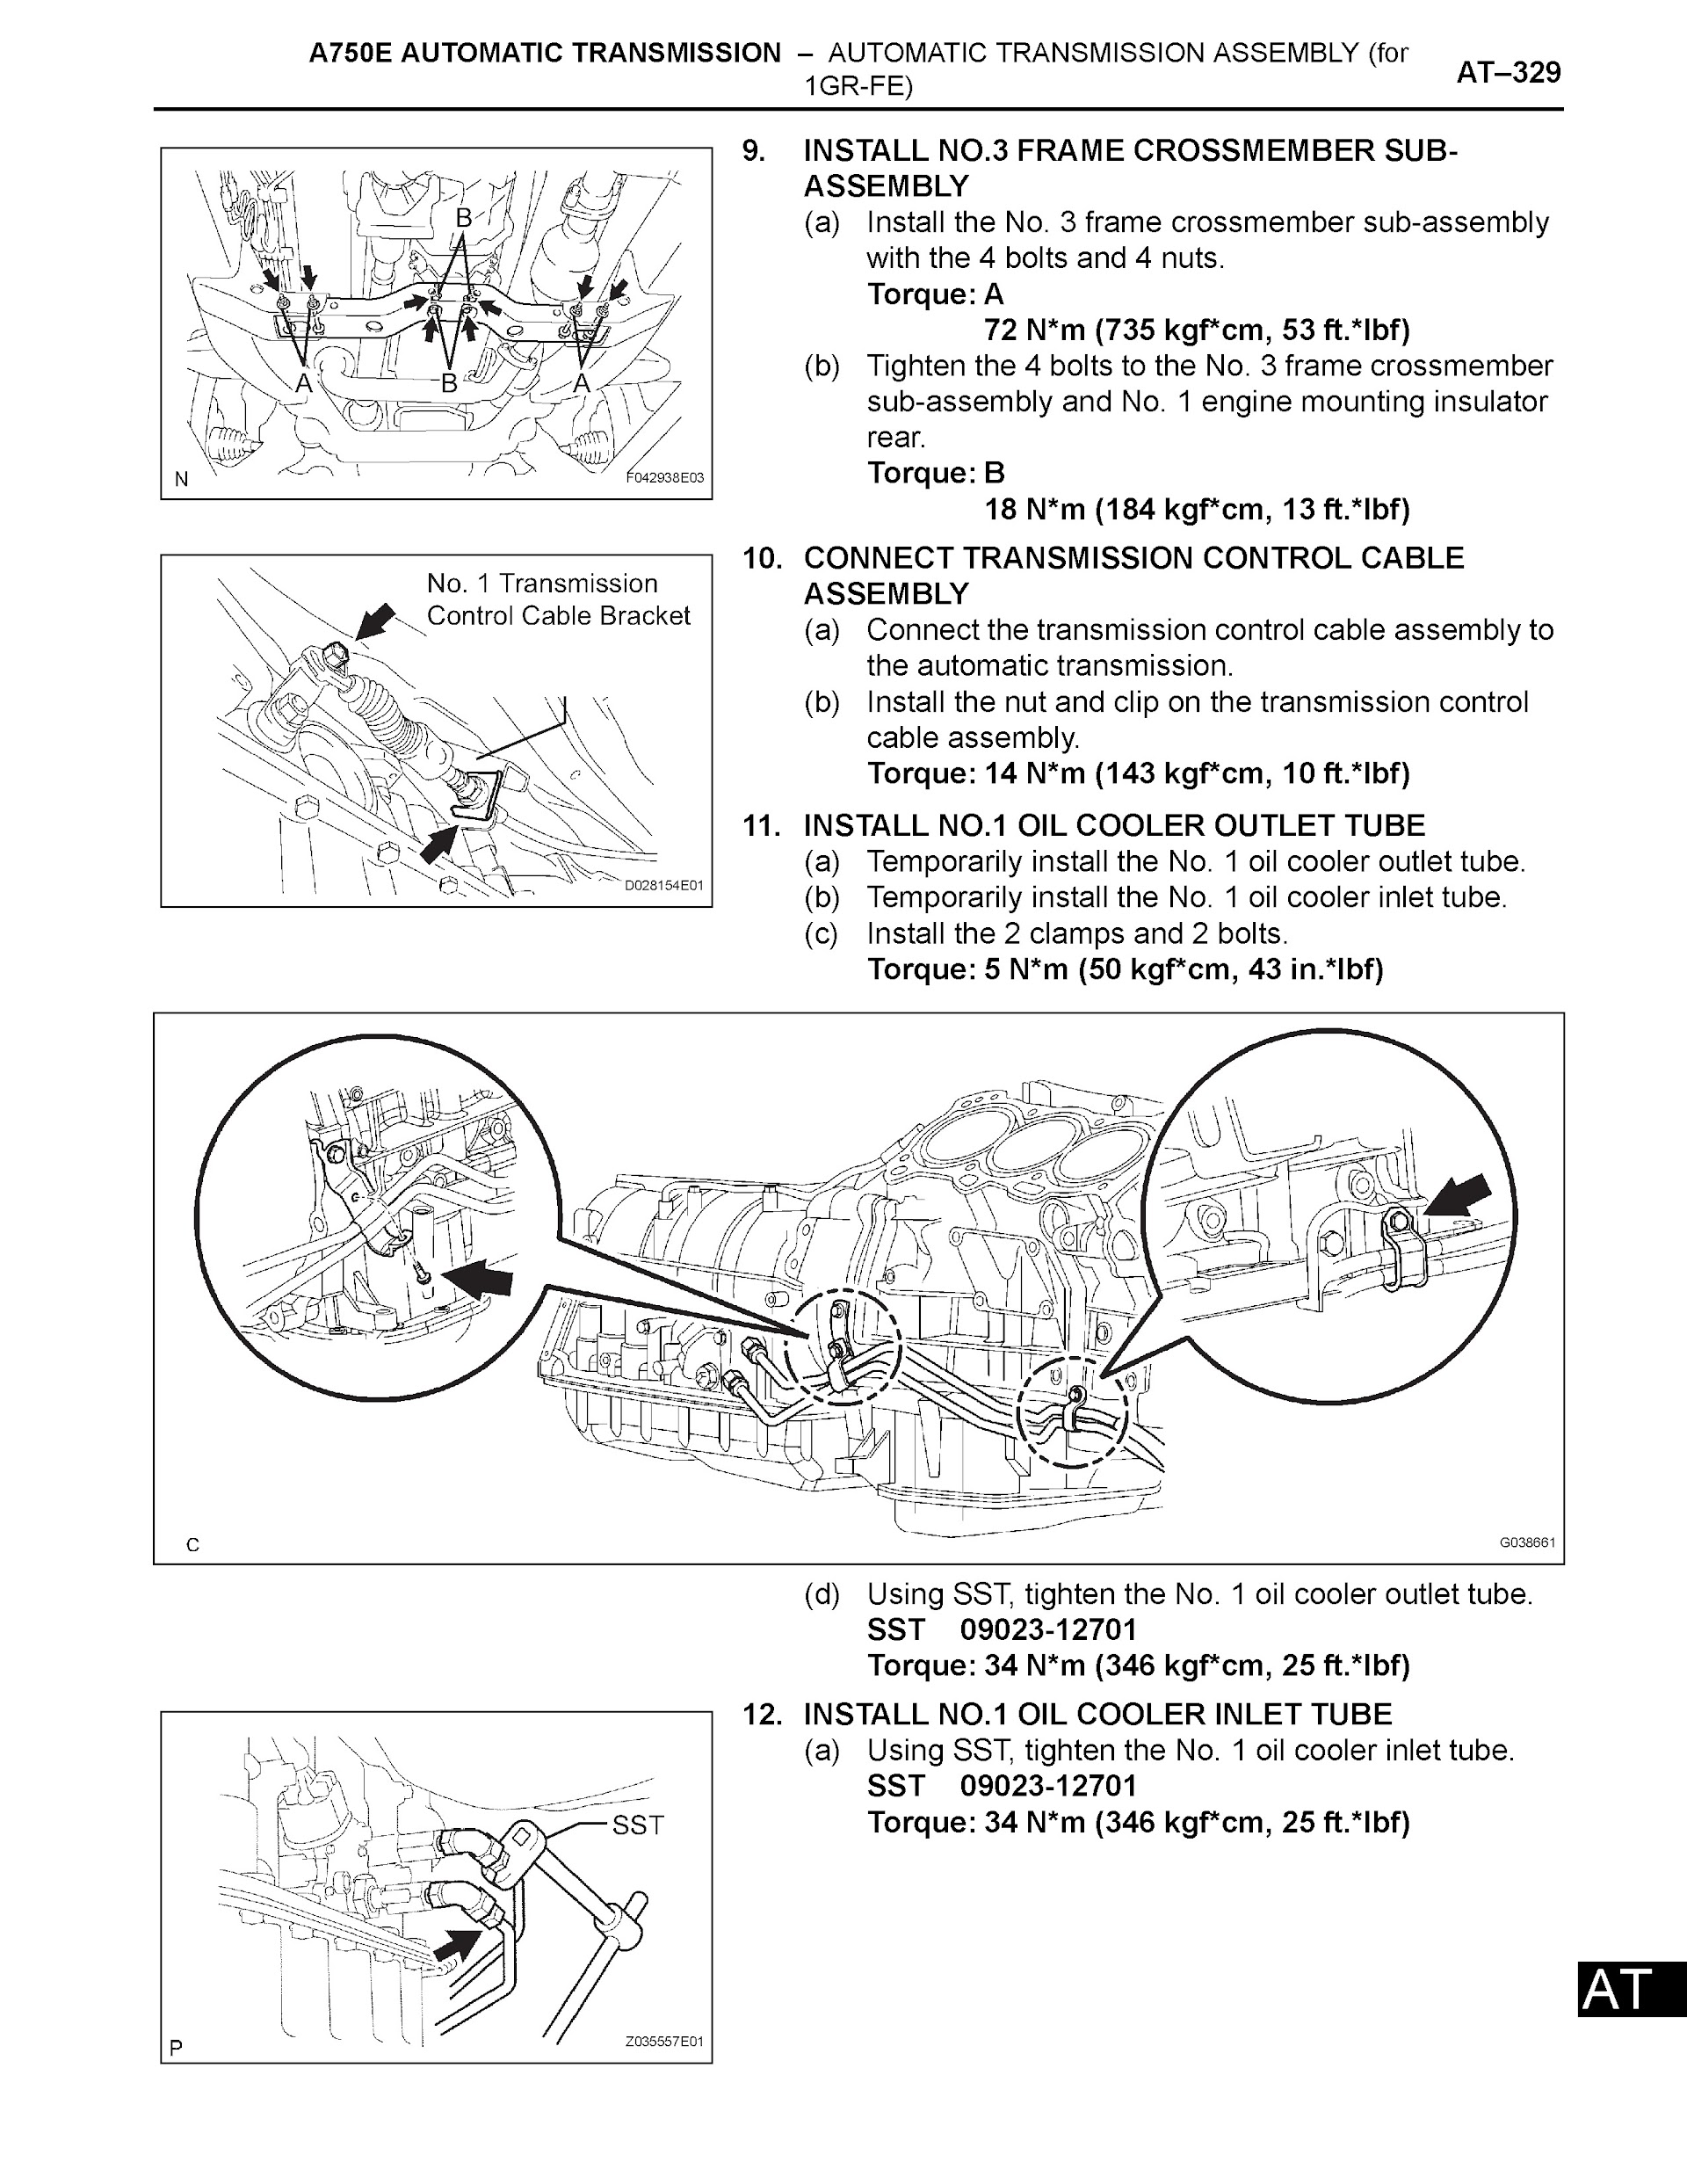 2006 Toyota 4Runner Repair Manual, Automatic Transmission Assembly